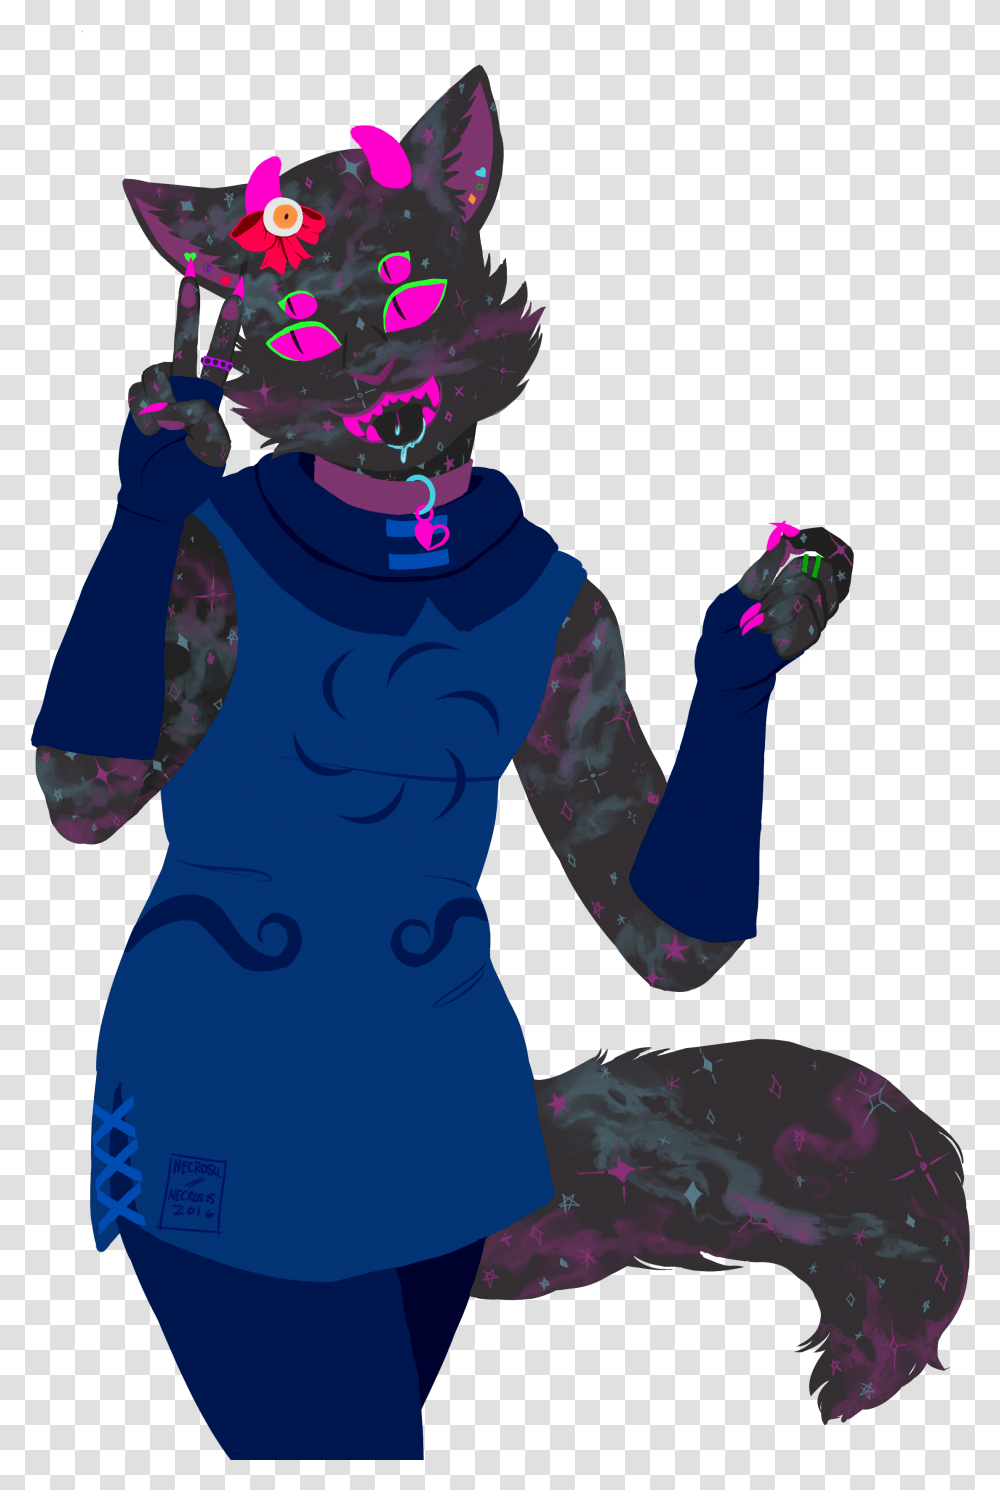 Download Gay Space Furry Gay Full Size Image Pngkit Gay Furry, Graphics, Art, Person, Clothing Transparent Png